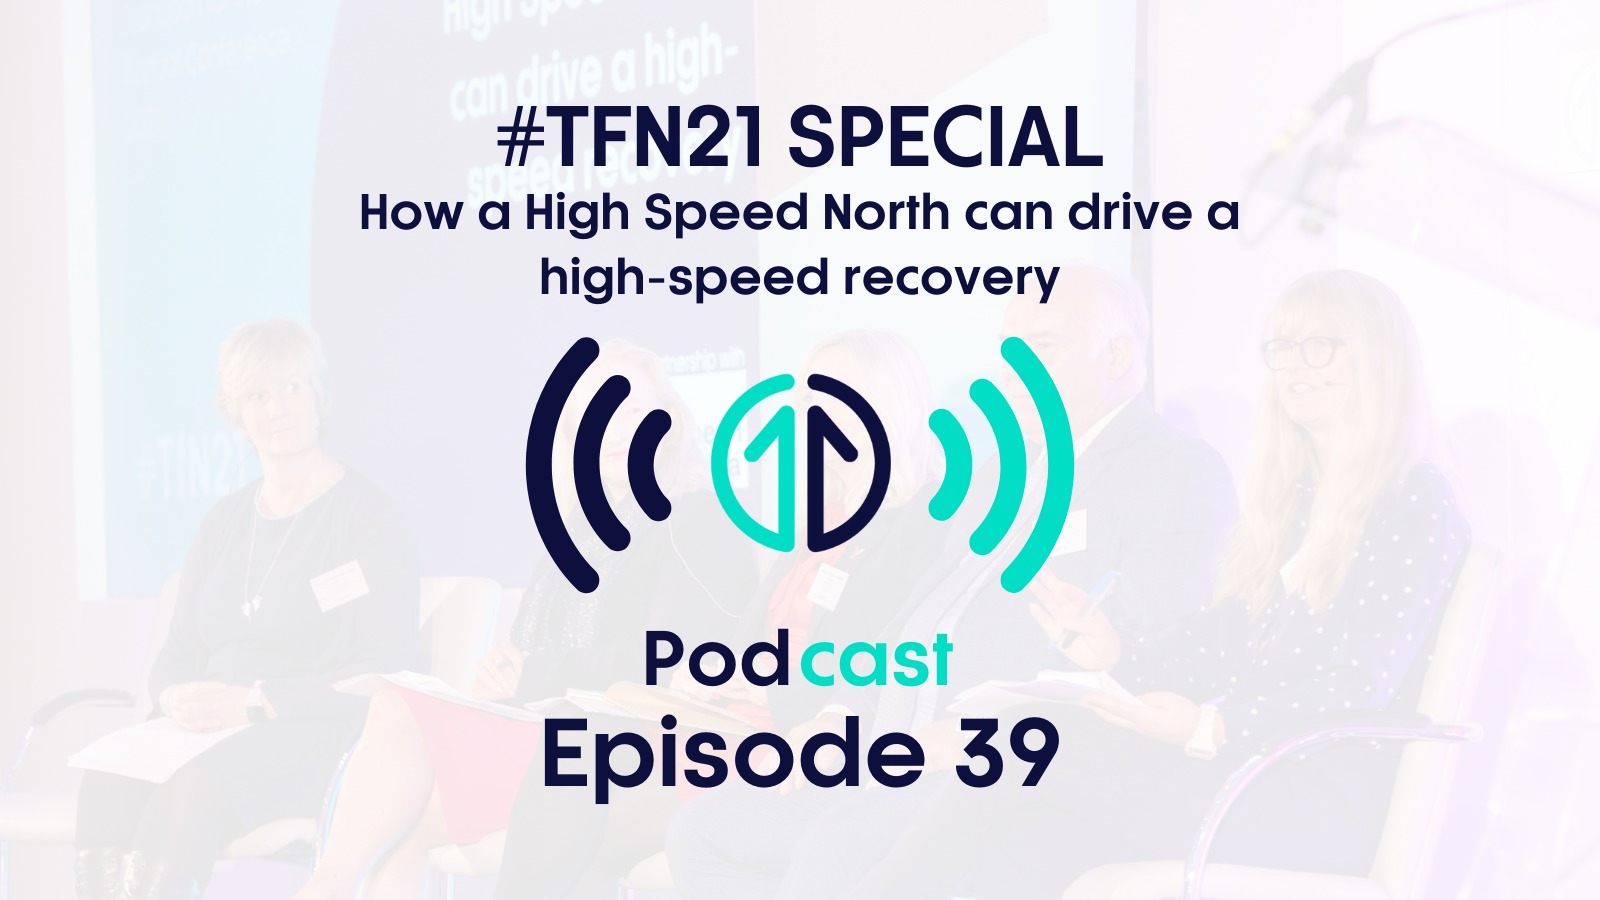 #TfN21 Annual Conference Special: High Speed North and high-speed recovery | Episode 39